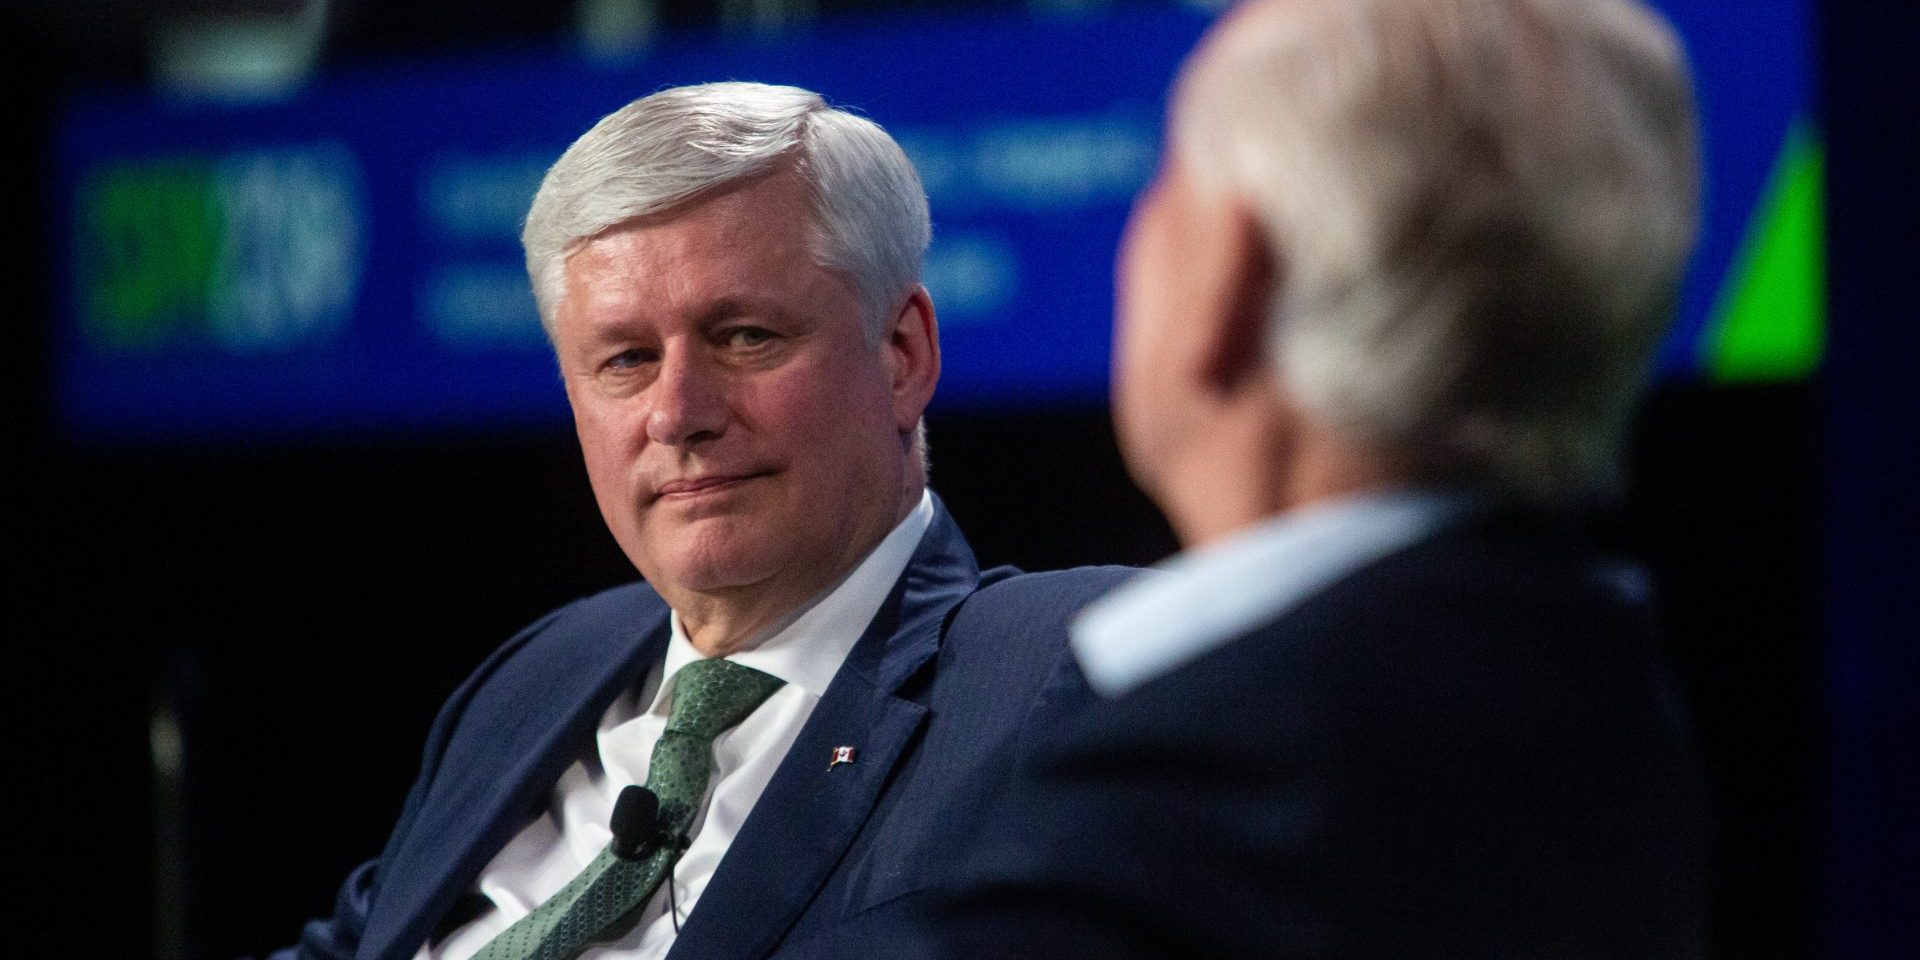 Former Prime Minister Steven Harper and former Reform Party leader Preston Manning have a fireside chat on the opening day of the Canada Strong and Free Networking conference in Ottawa on  March 22, 2023. The Hill Times photograph by Andrew Meade